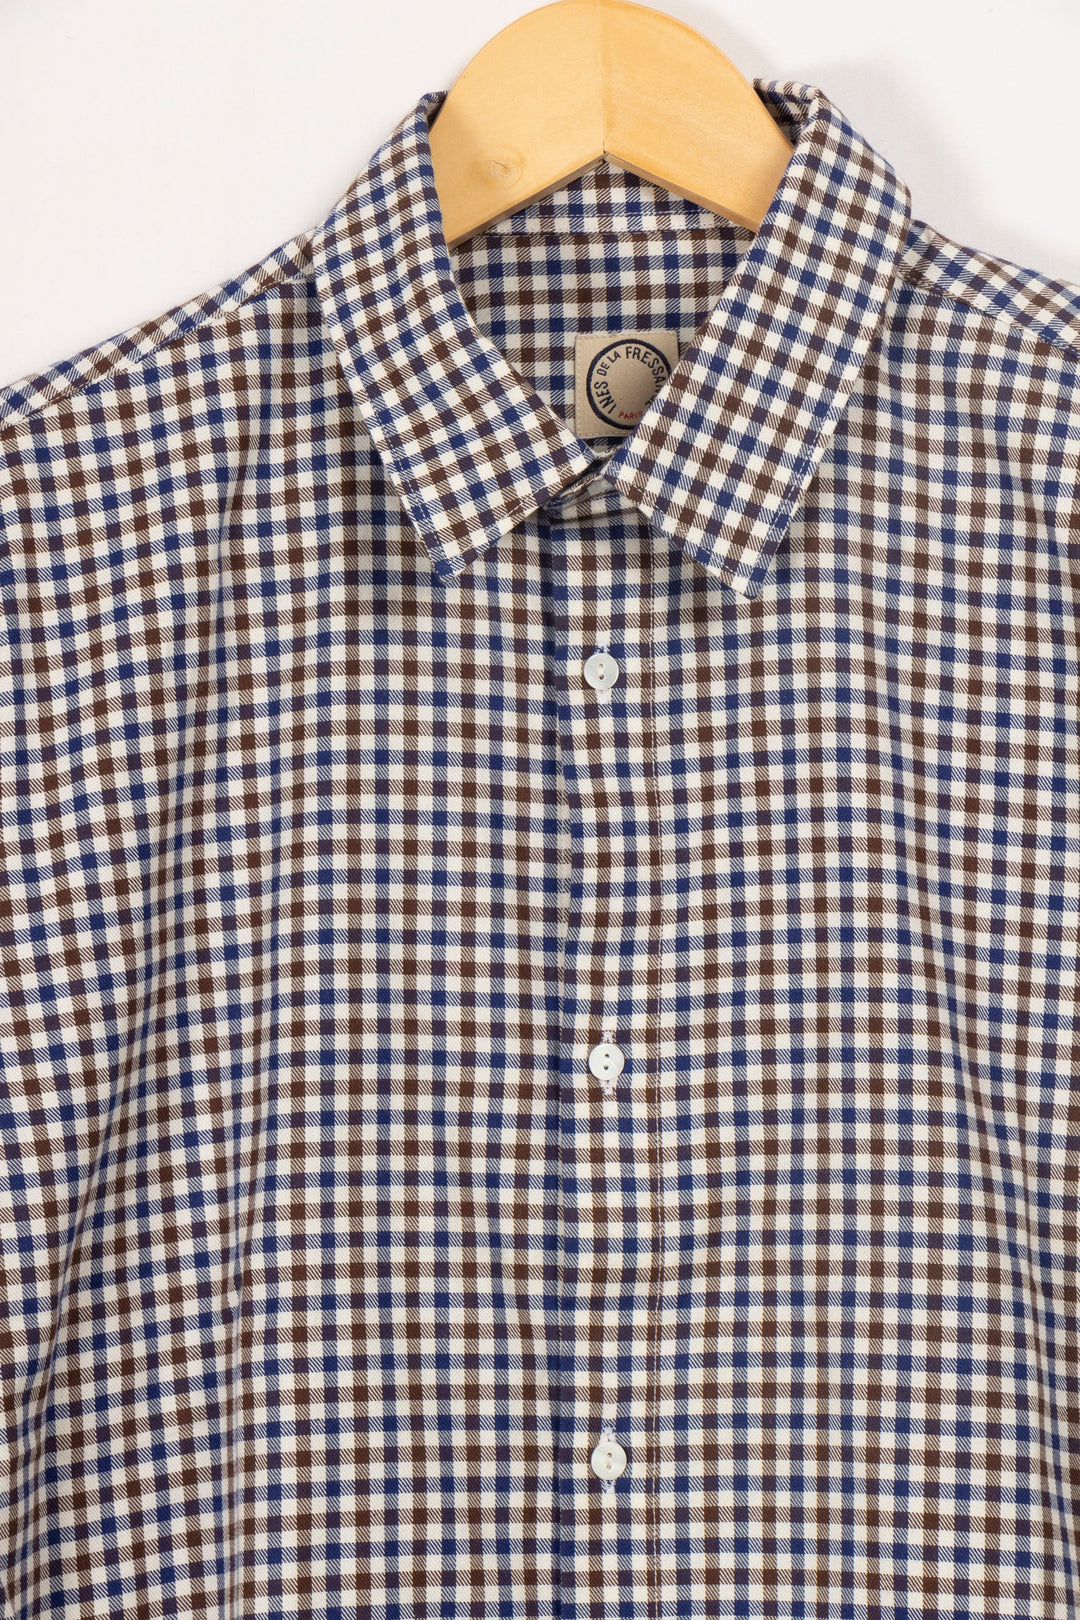 Blue and brown checked shirt - S